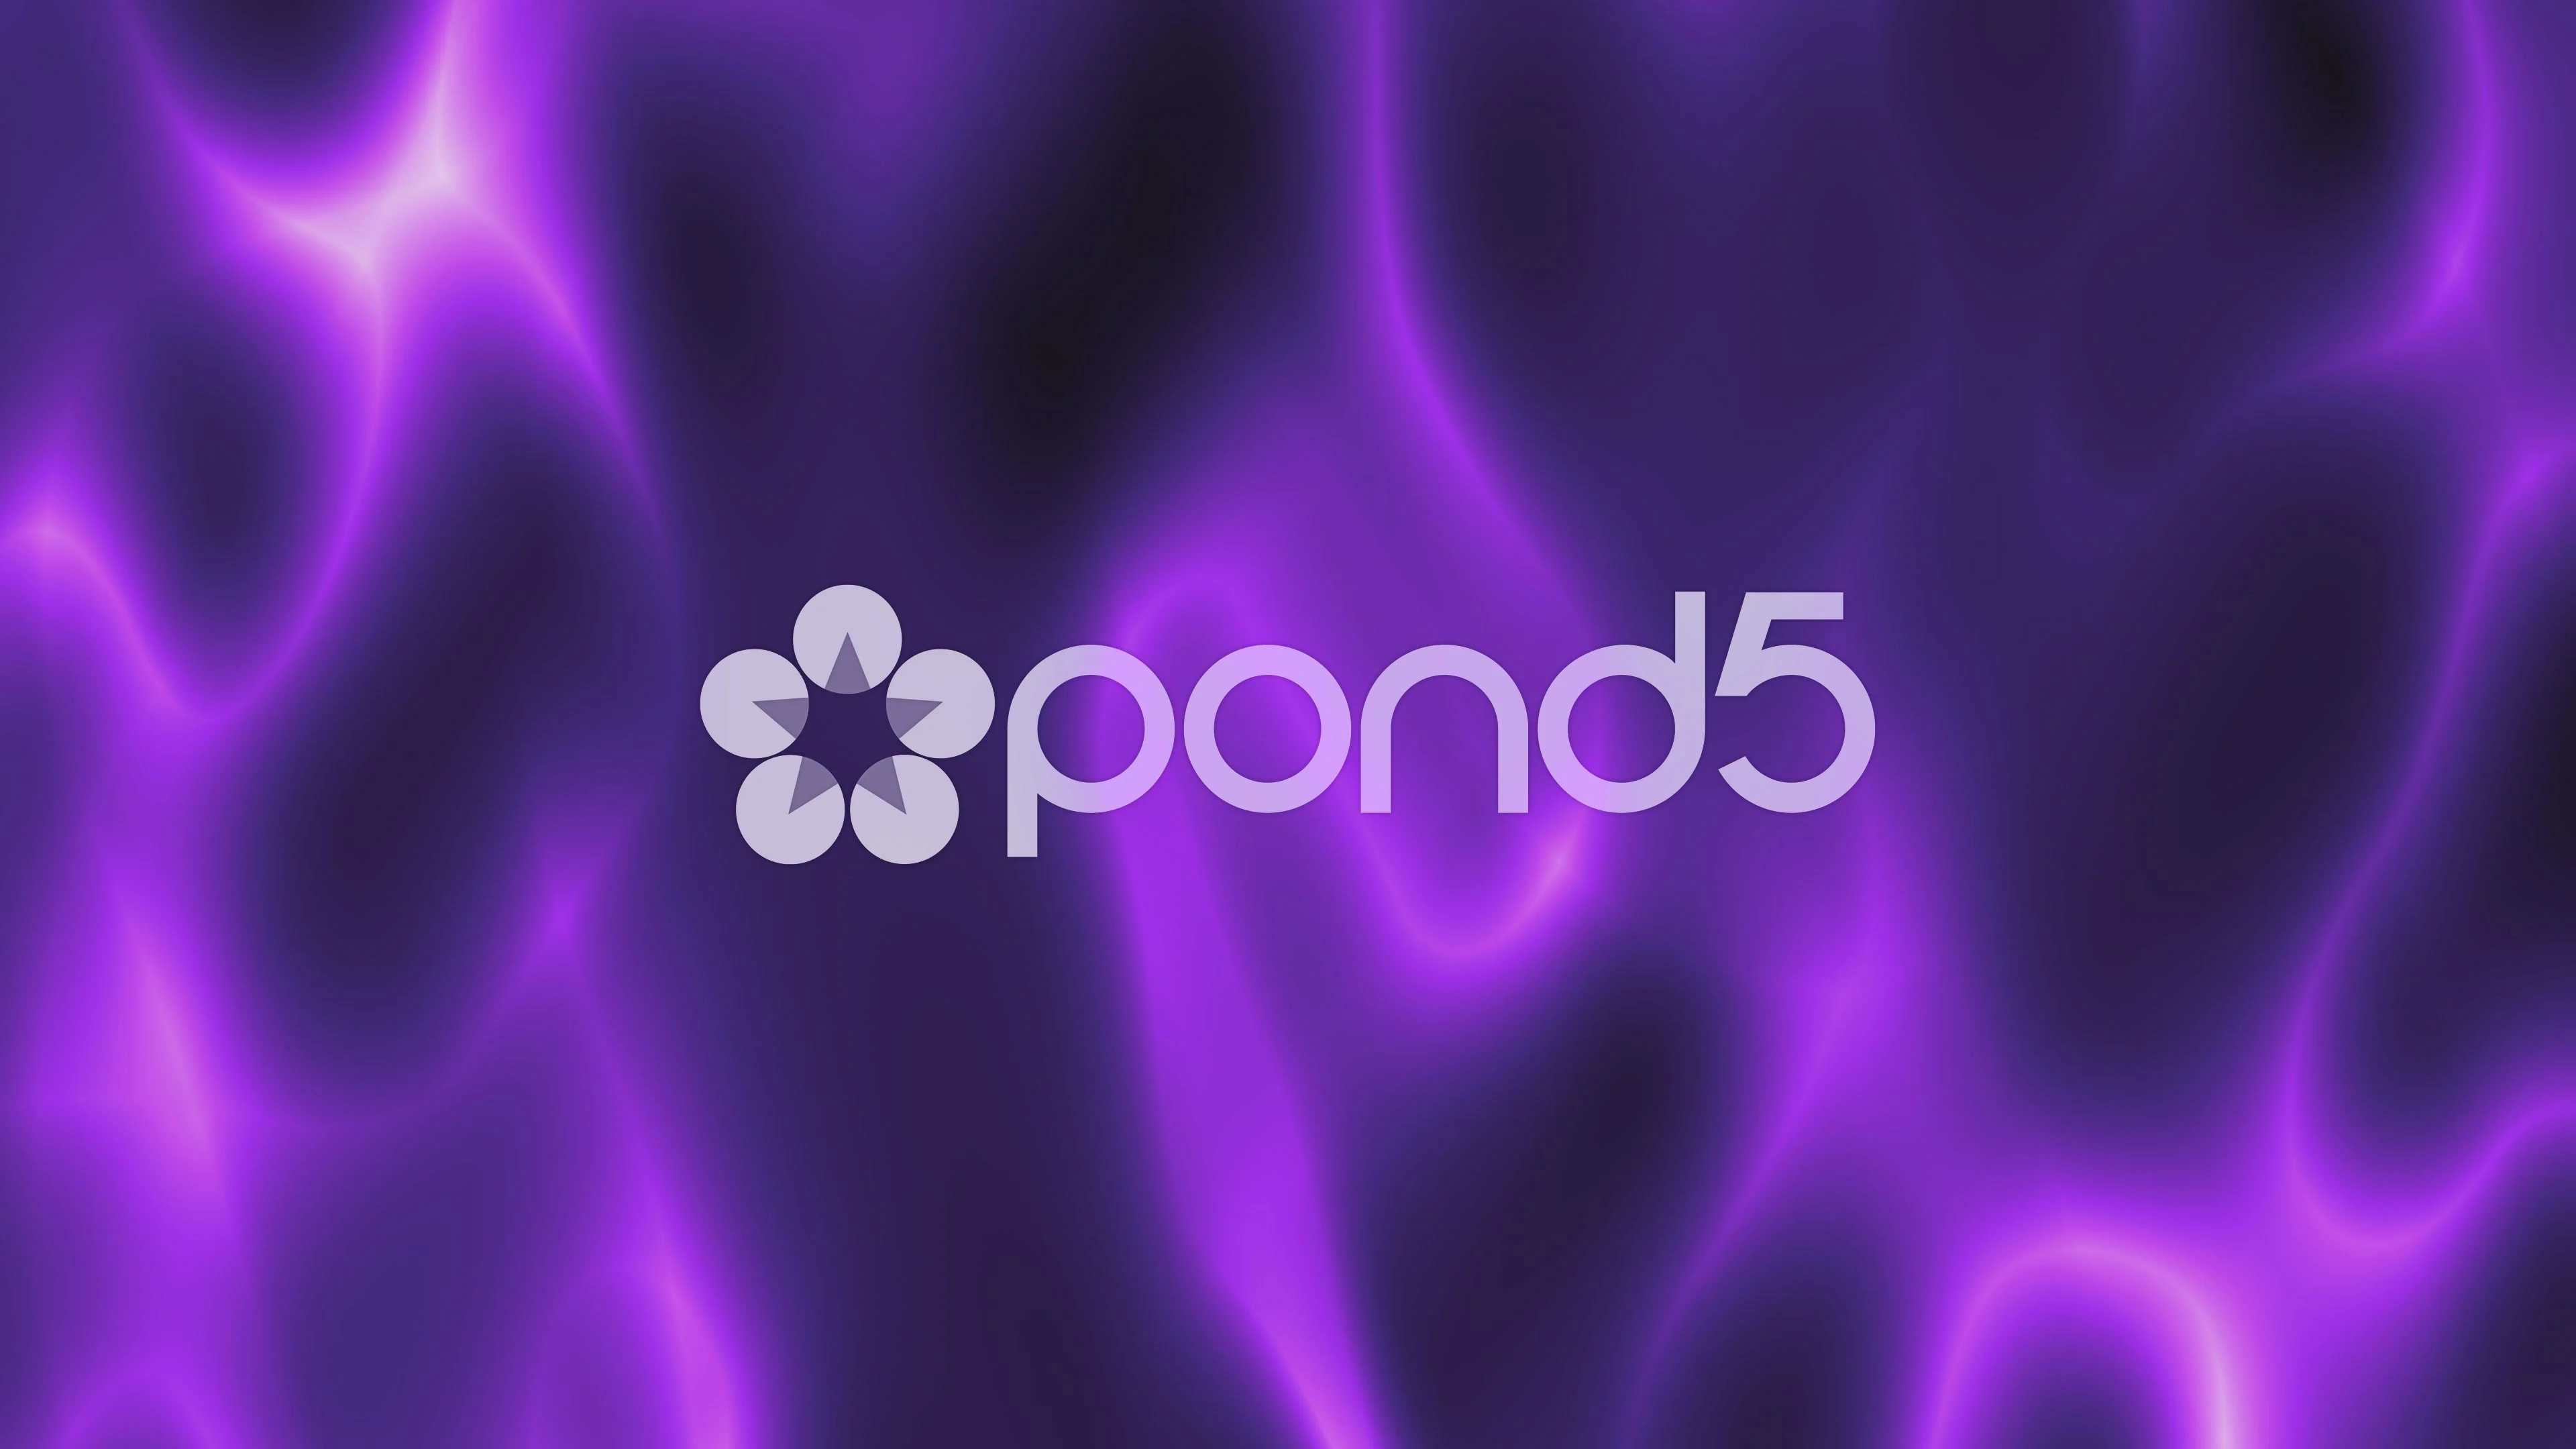 Abstract Neon Purple Background Fractal Lines Stock Footage Video (100%  Royalty-free) 13058285